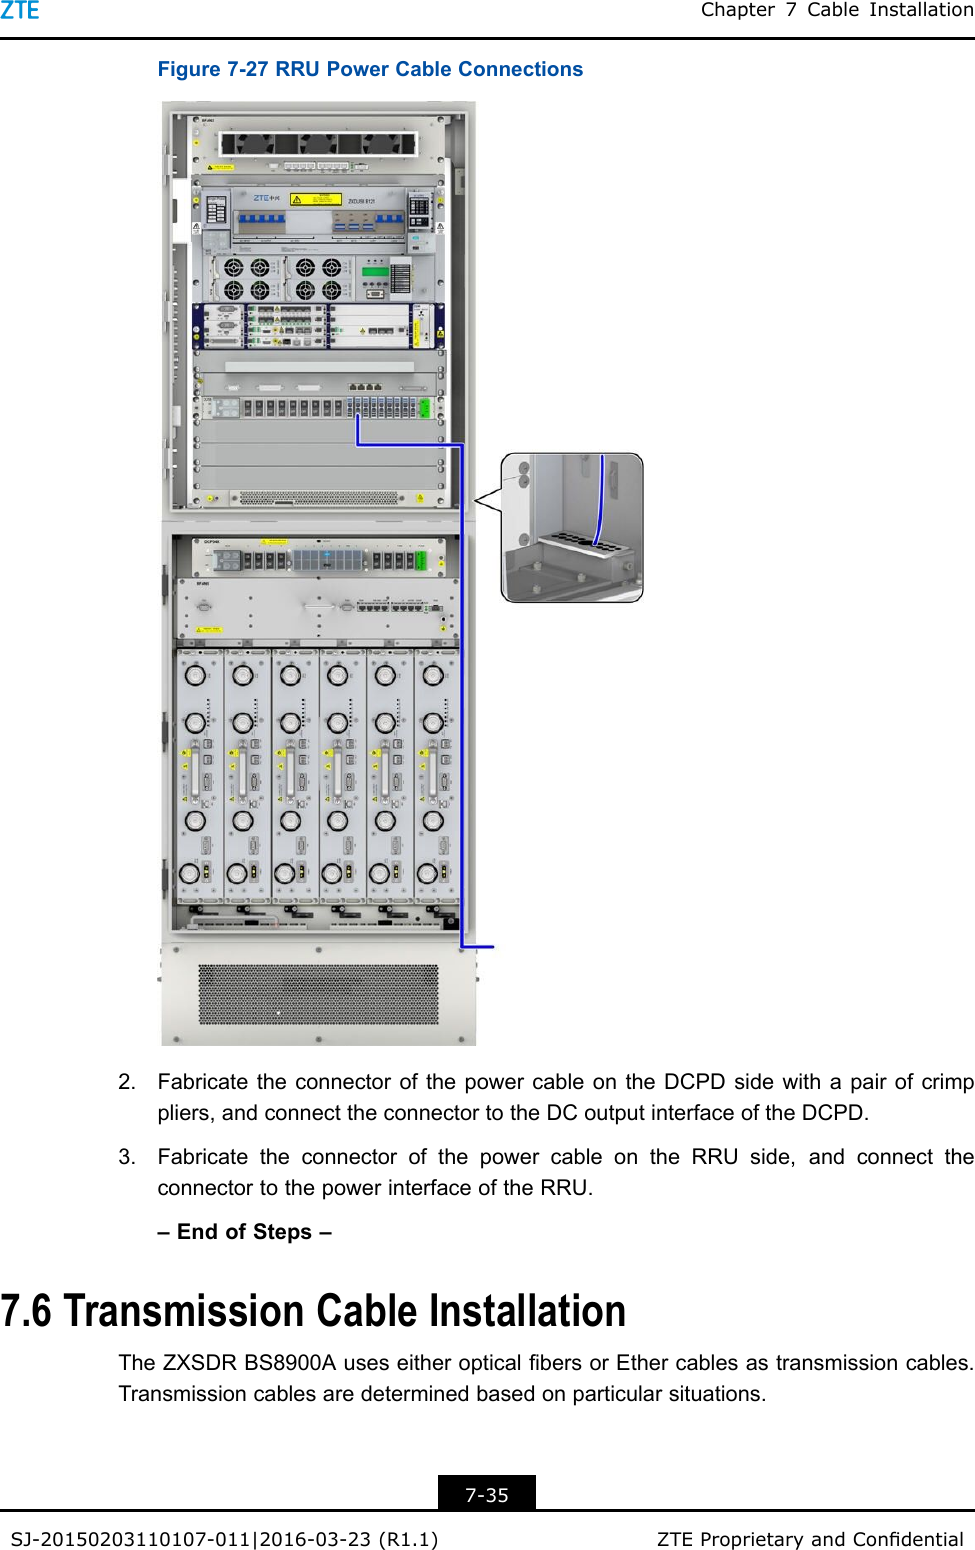 Chapter7CableInstallationFigure7-27RRUPowerCableConnections2.FabricatetheconnectorofthepowercableontheDCPDsidewithapairofcrimppliers,andconnecttheconnectortotheDCoutputinterfaceoftheDCPD.3.FabricatetheconnectorofthepowercableontheRRUside,andconnecttheconnectortothepowerinterfaceoftheRRU.–EndofSteps–7.6TransmissionCableInstallationTheZXSDRBS8900AuseseitheropticalbersorEthercablesastransmissioncables.Transmissioncablesaredeterminedbasedonparticularsituations.7-35SJ-20150203110107-011|2016-03-23(R1.1)ZTEProprietaryandCondential